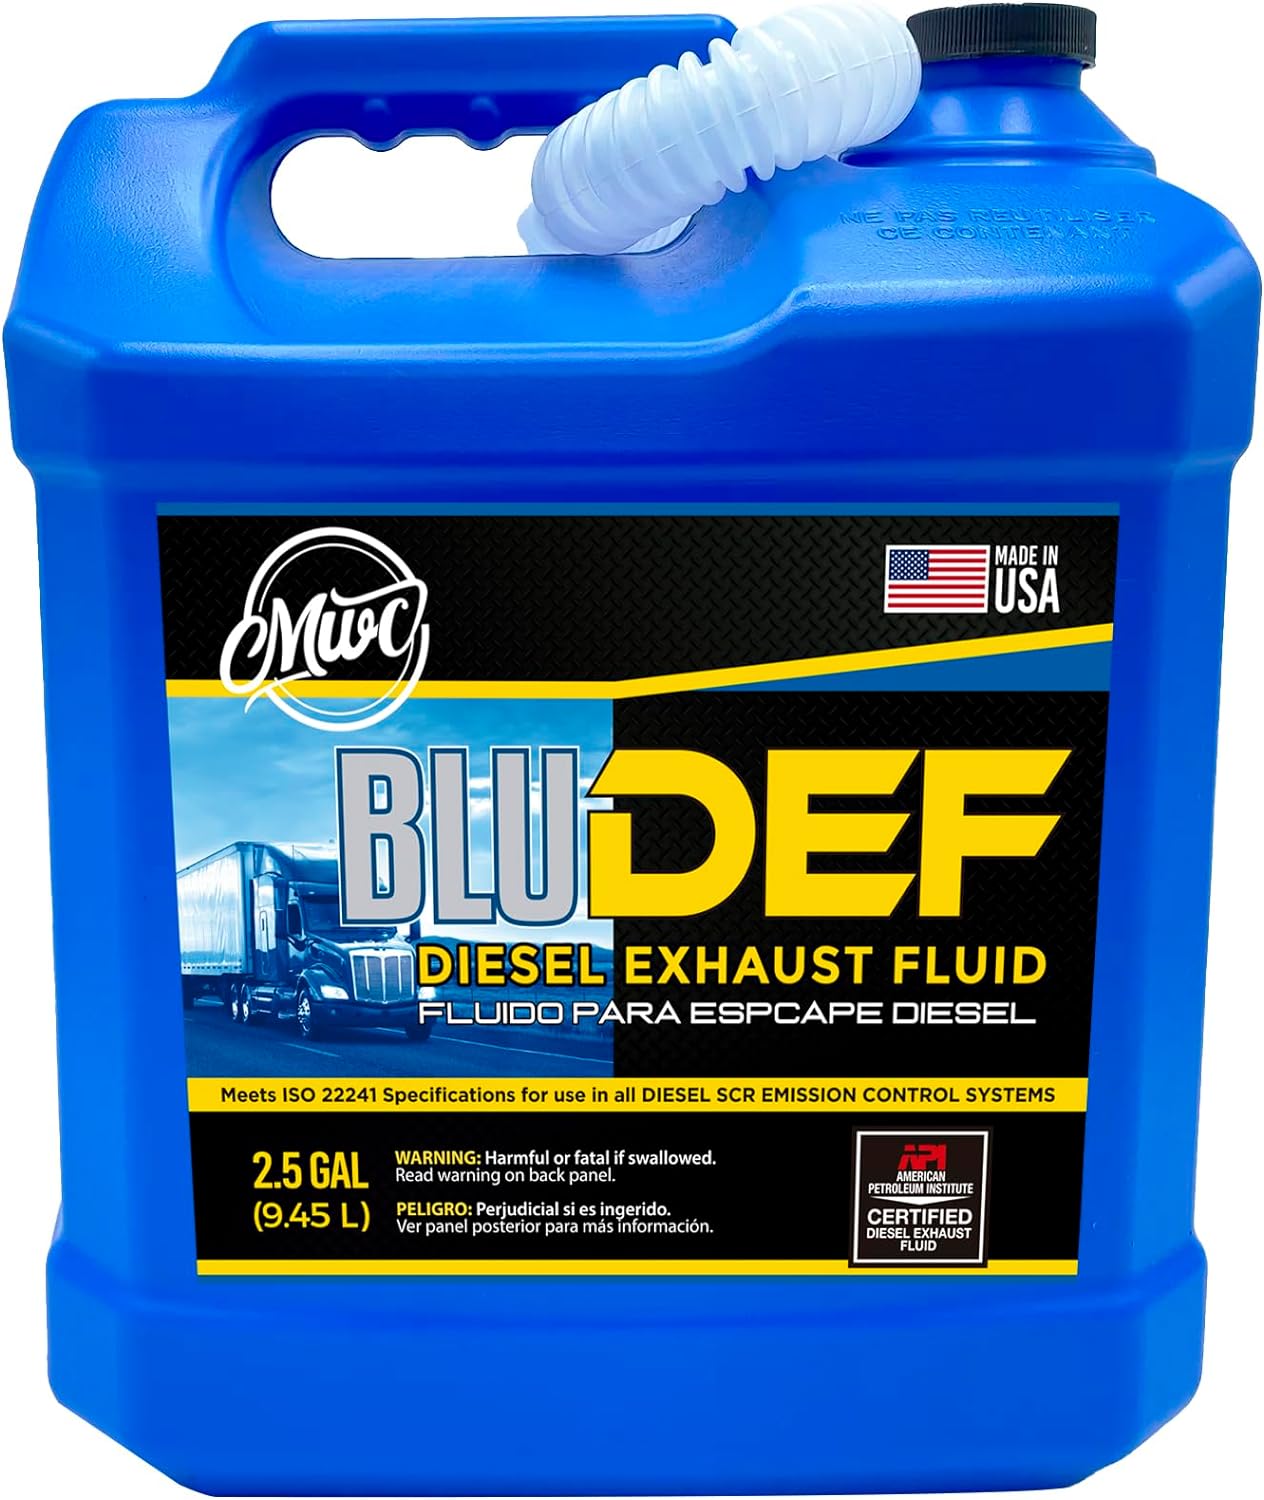 MWC BLUE DEF is formulated with high quality urea and demineralized water to work with ALL SCR-equipped diesel engines.